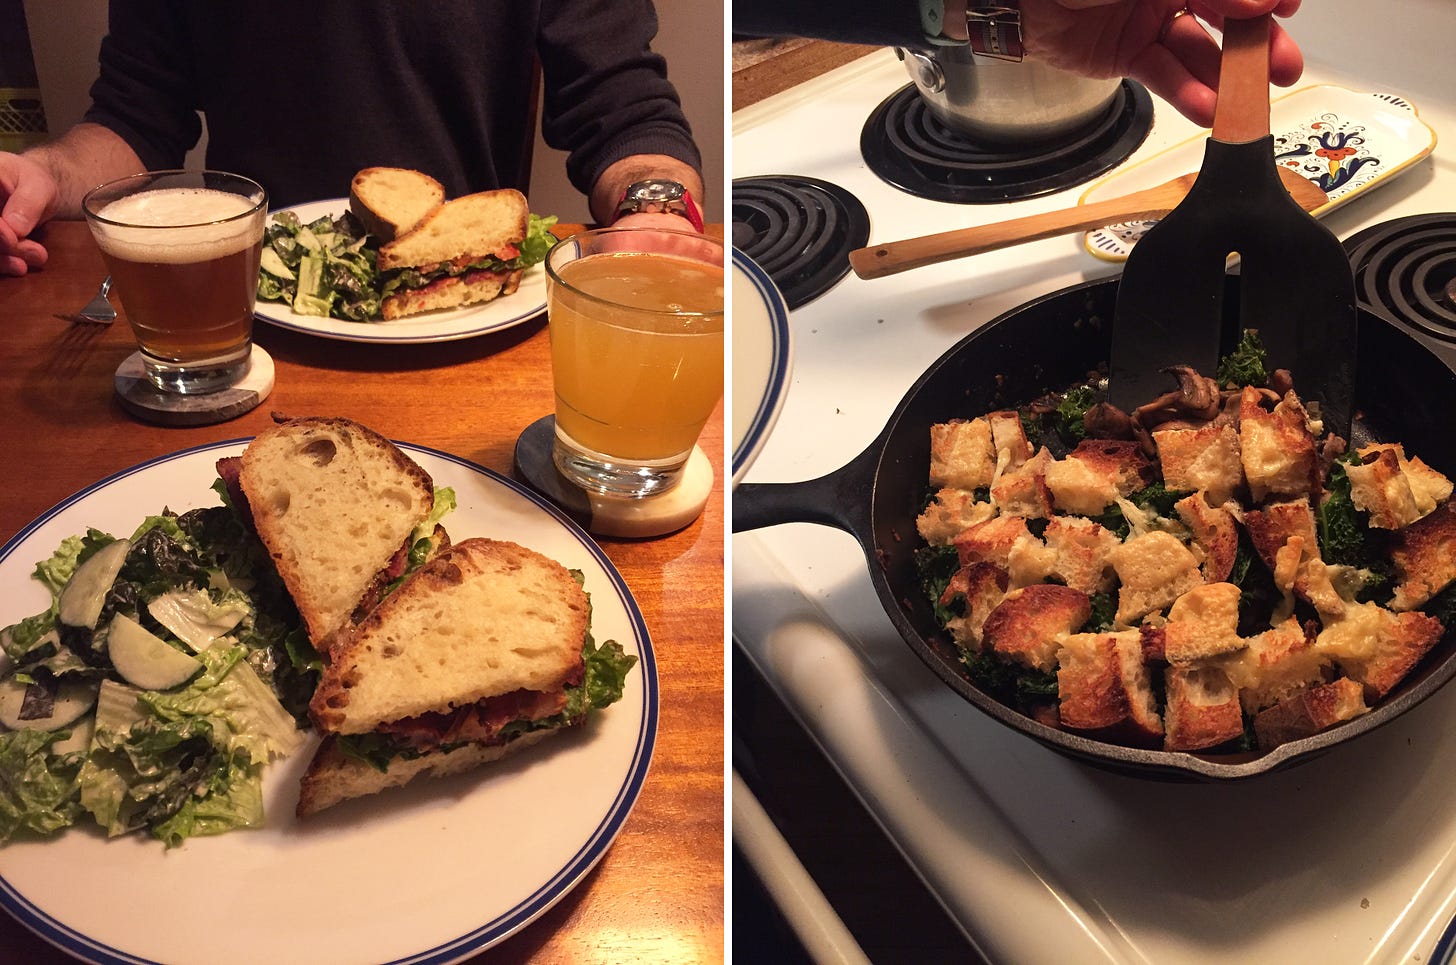 Left image: two plates each with a BLT on crusty sourdough sliced in half, with a side of Caesar salad. Two glasses of beer rest on coasters near the plates. Right image: on a stovetop, a large spatula scoops into a pan of toasted croutons, mushrooms, and kale, with cheese melted on top.